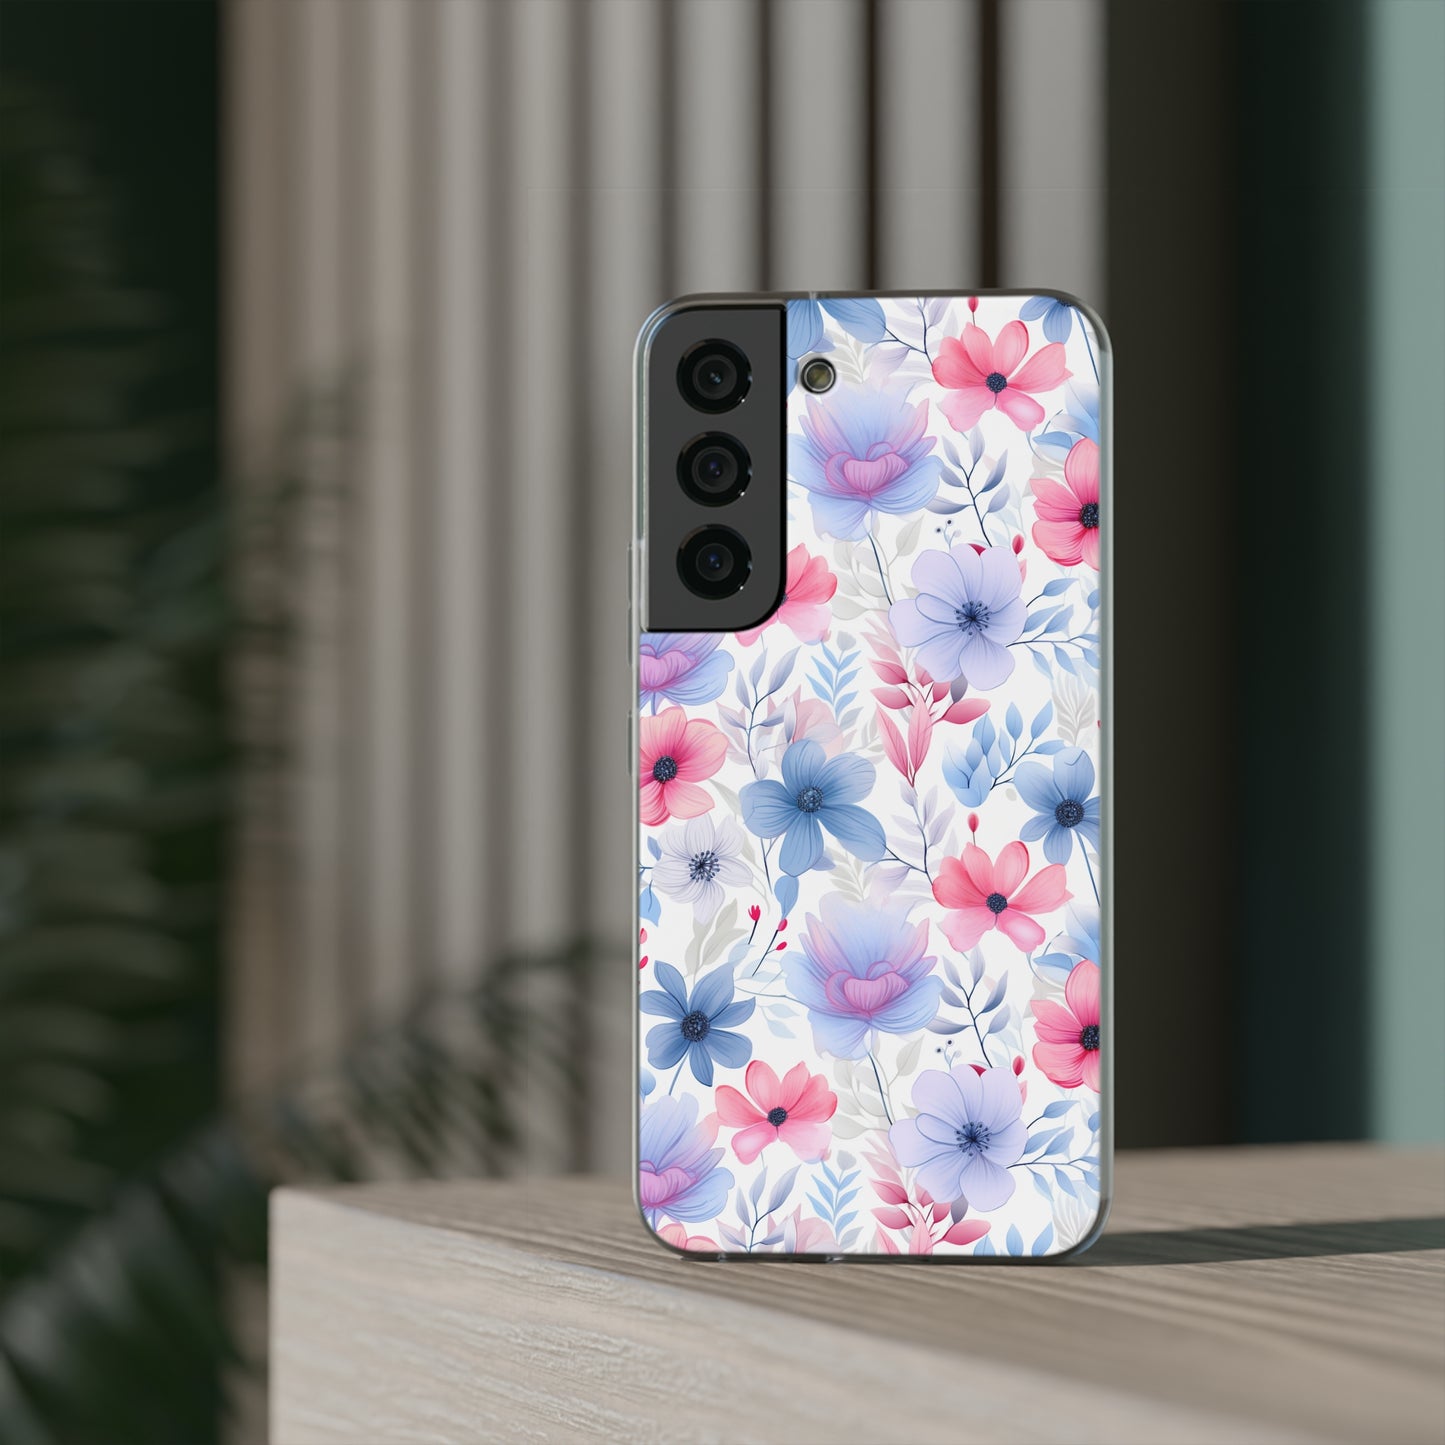 Floral Whispers - Soft Hues of Violets, Pinks, and Blues - Flexi Phone Case Phone Case Pattern Symphony Samsung Galaxy S22 with gift packaging  